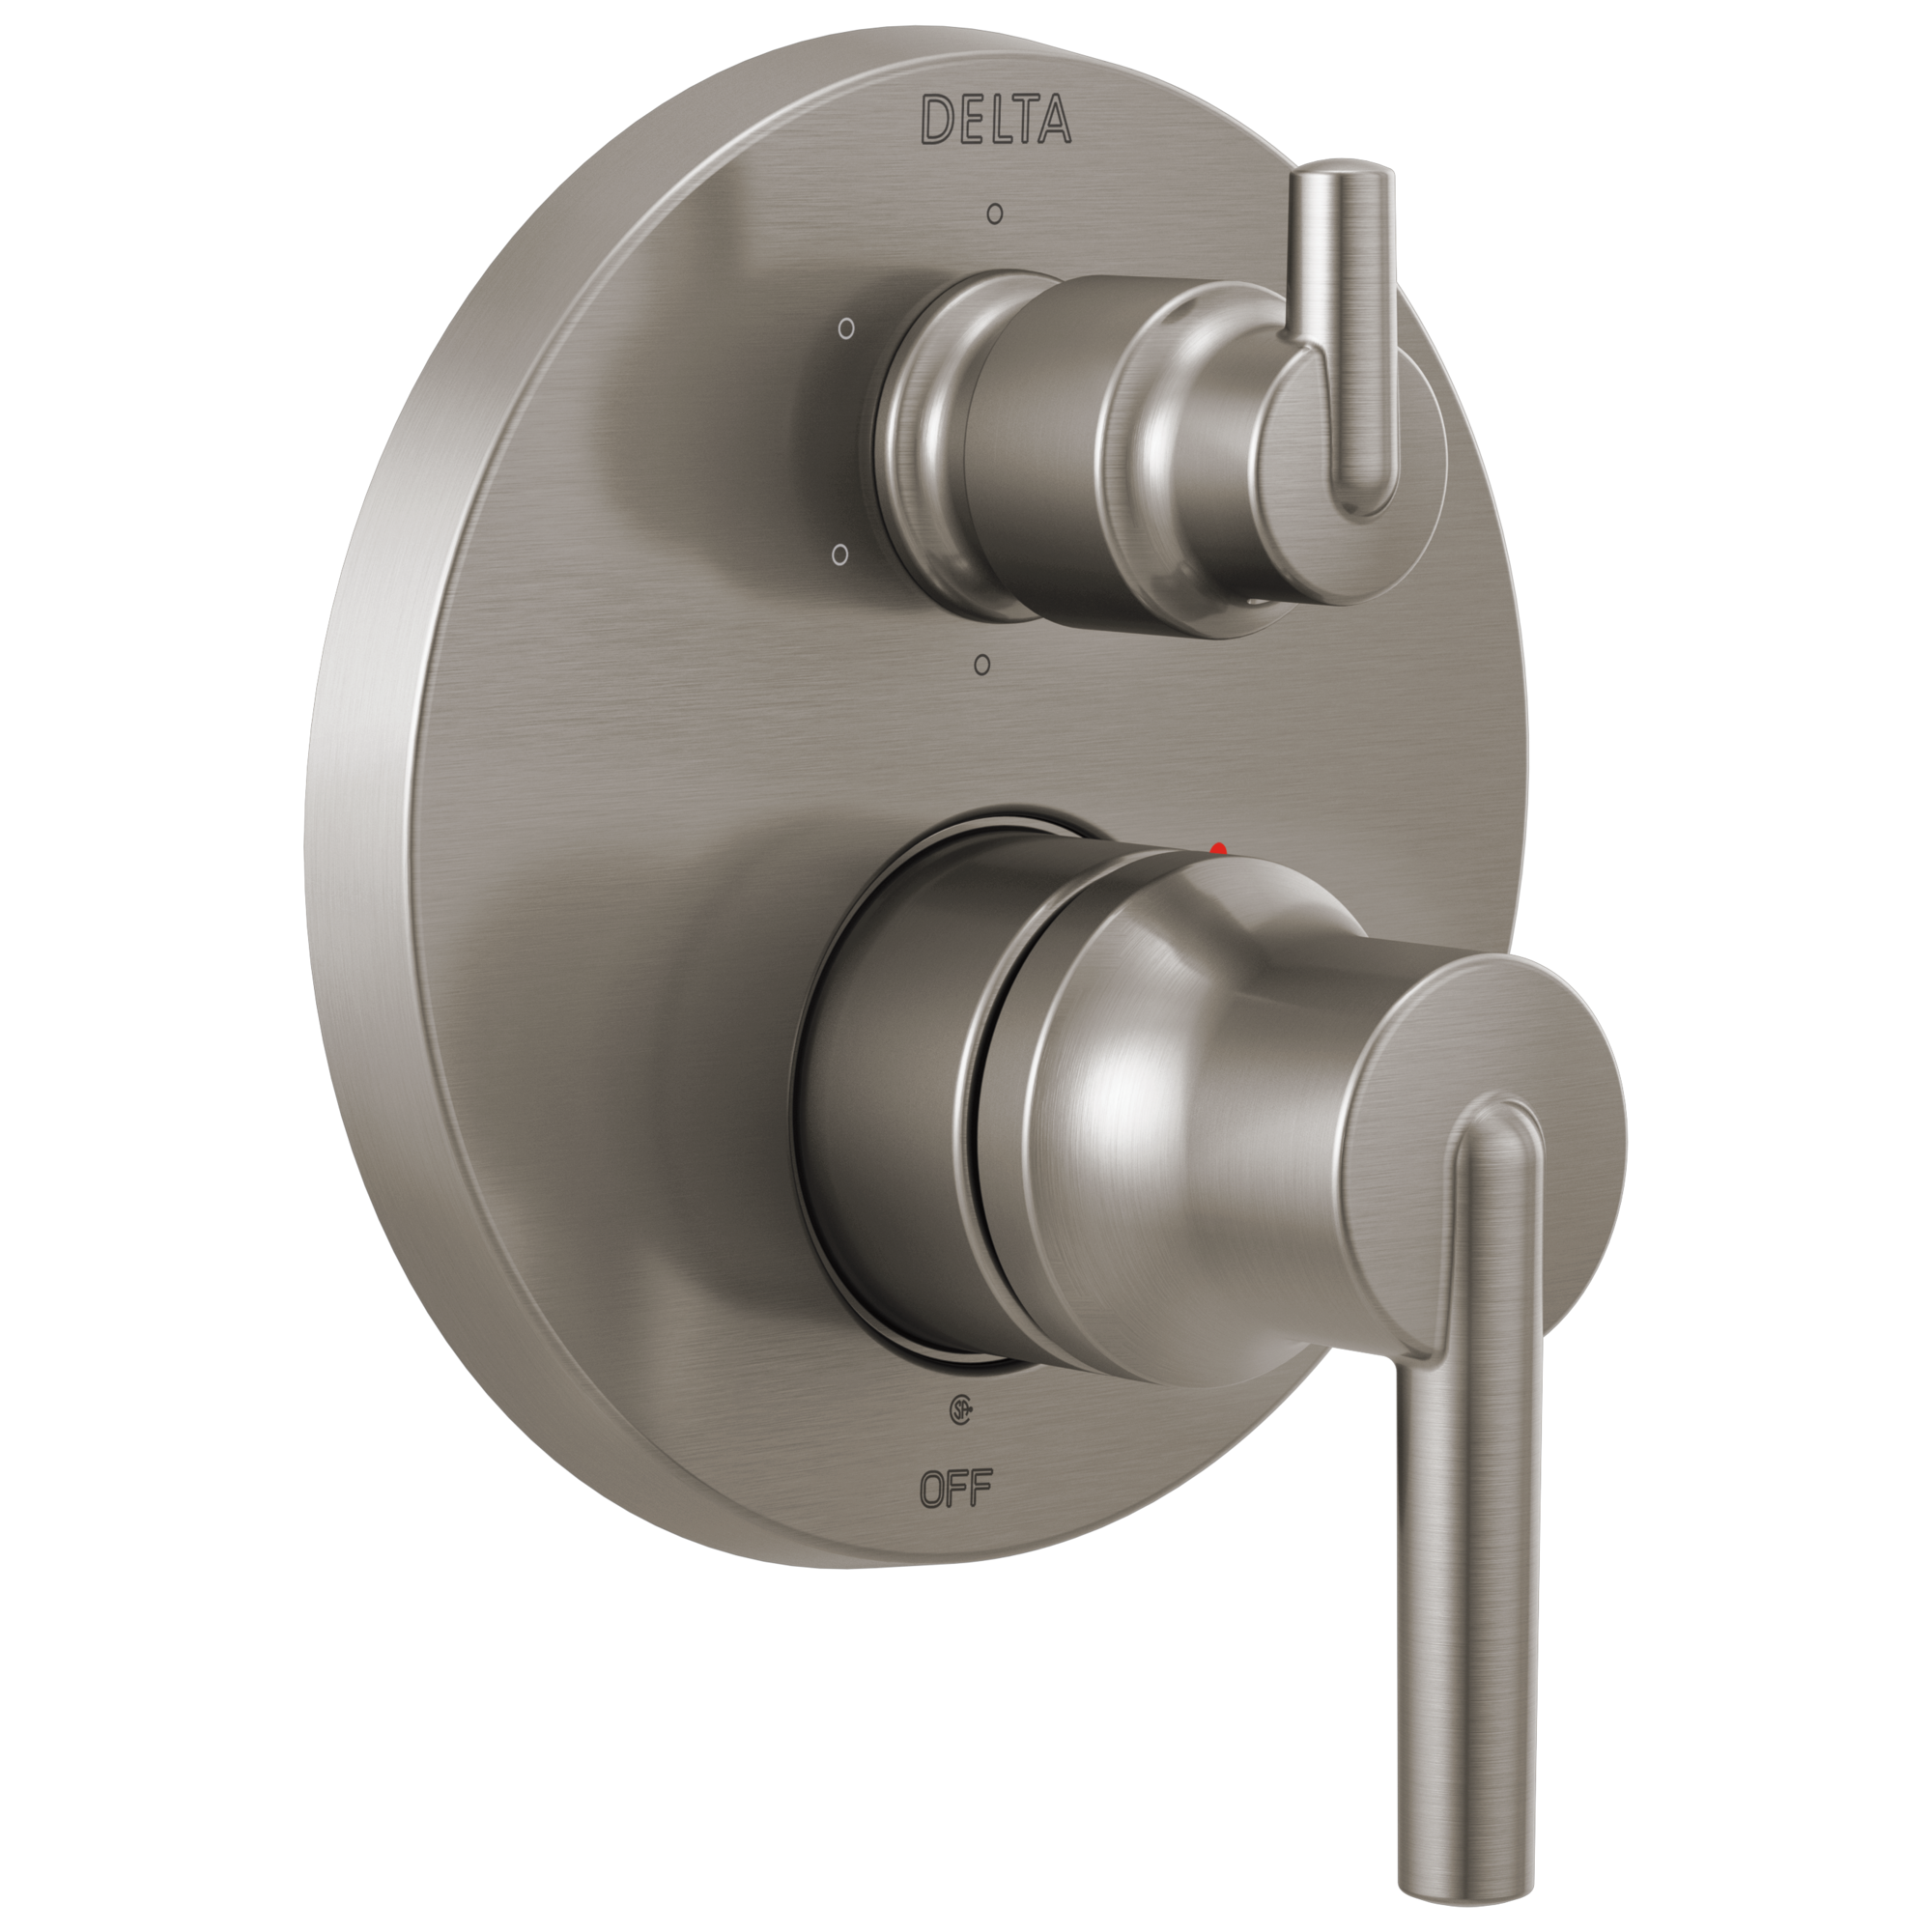 Delta T24959 Trinsic Contemporary Two Handle Monitor 14 Series Valve Trim with 6-Setting Integrated Diverter